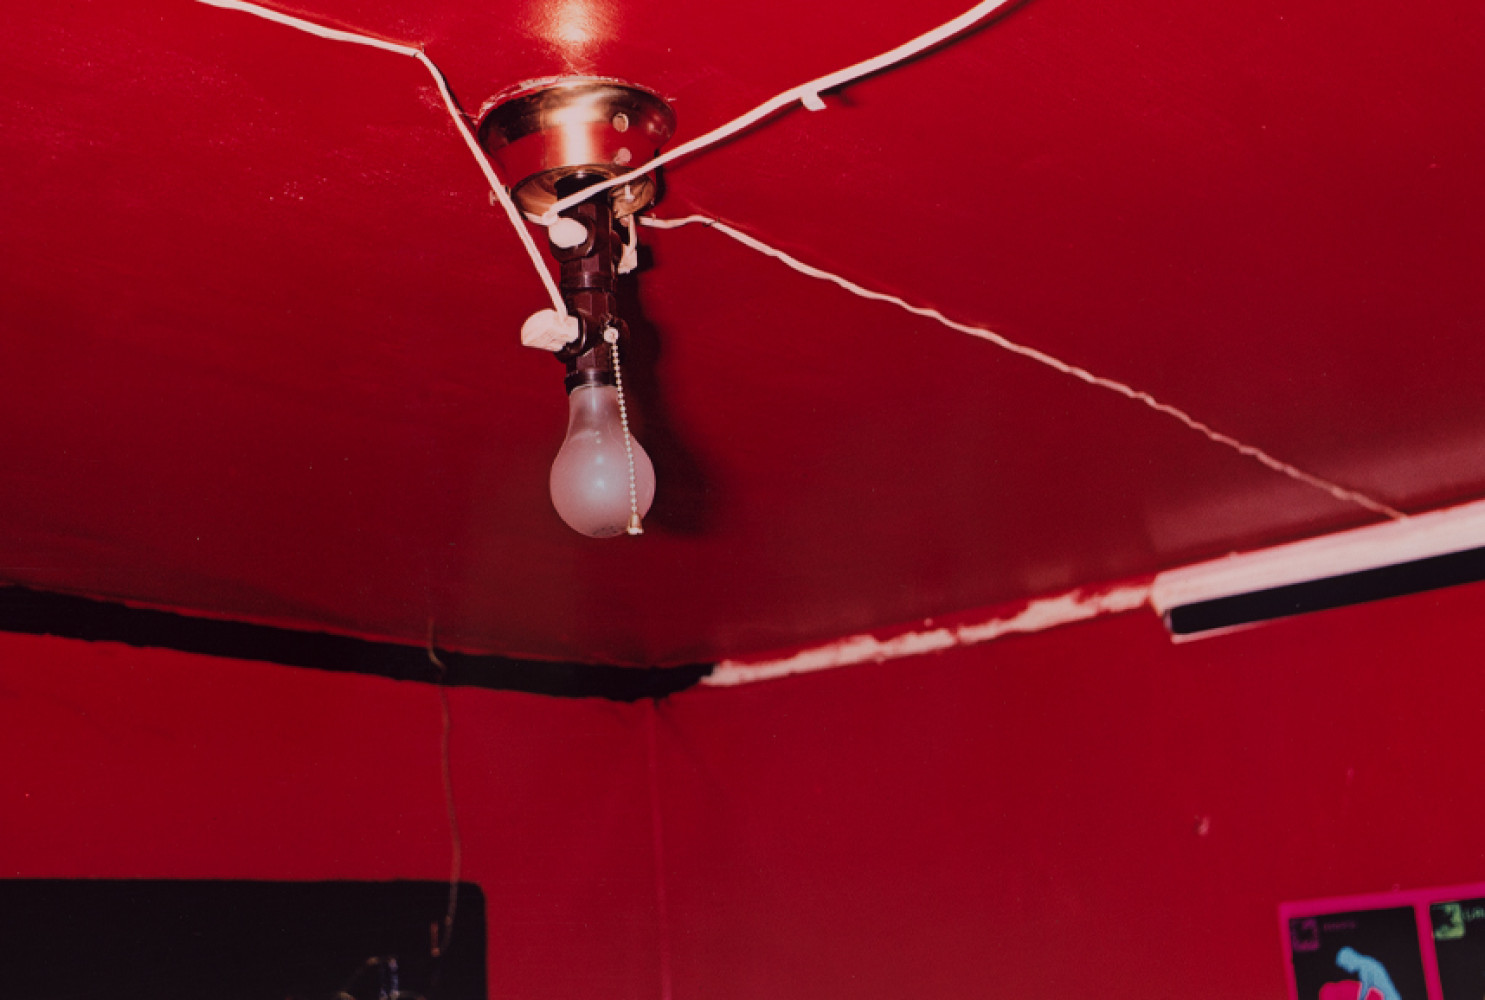 Untitled (detail) (Red Ceiling, Greenwood, Mississippi), 1971. Dye transfer print, ca. 1973, 12 5/8 x 18 7/8 inches. © Eggleston Artistic Trust, courtesy of David Zwiner New York. 

 